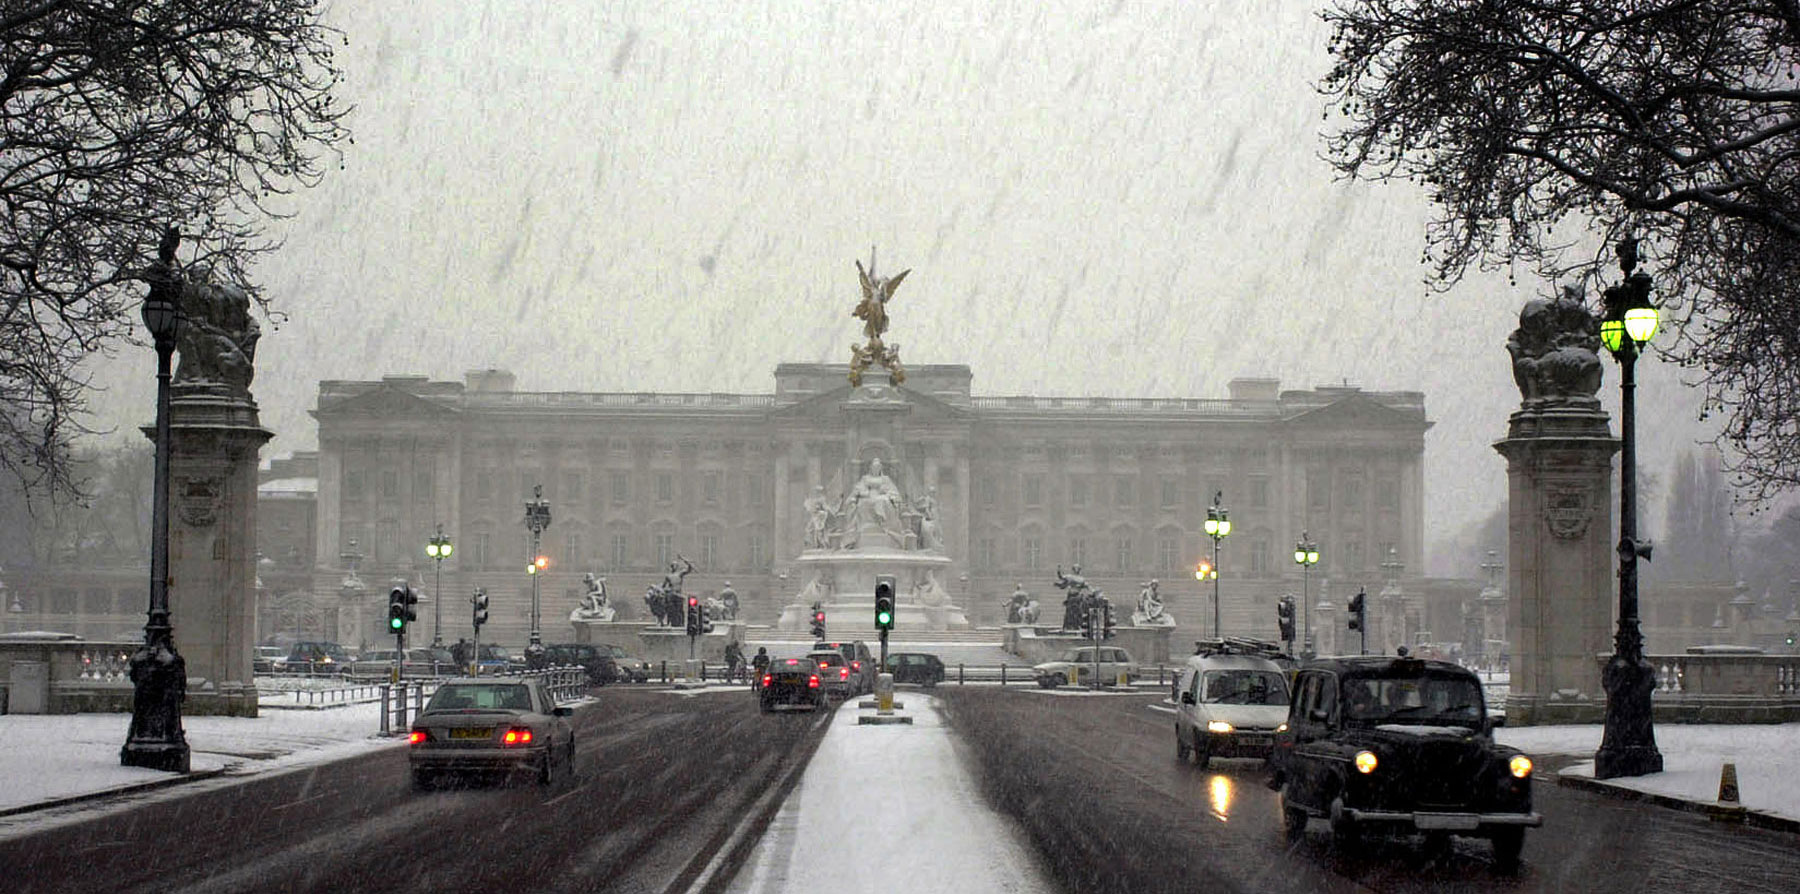 Buckingham palace in the snow